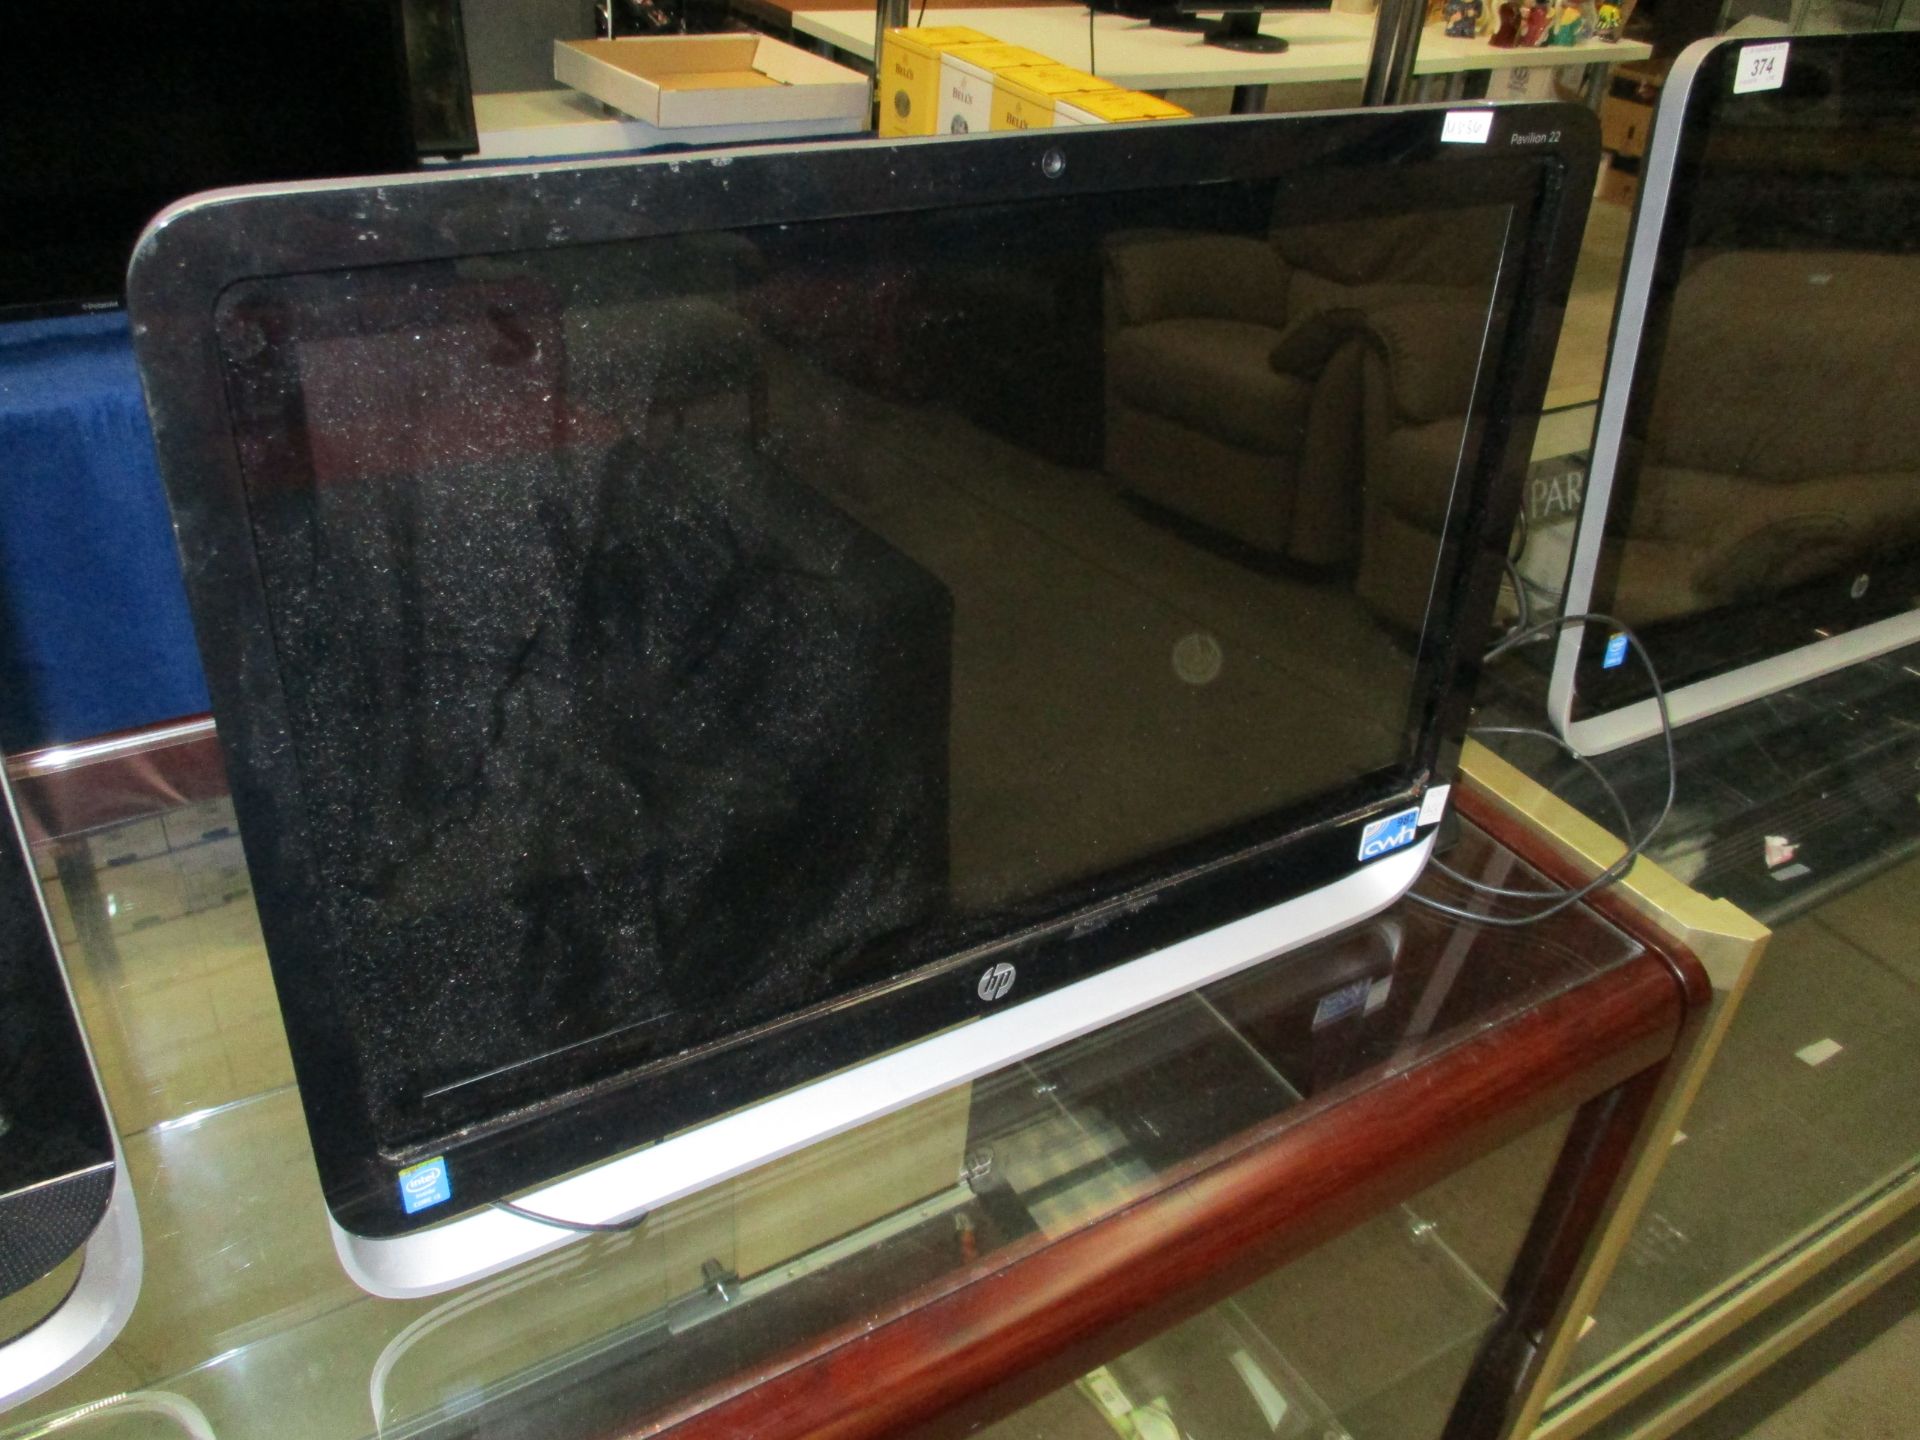 A HP Pavilion 22 all-in-one computer 22" screen,